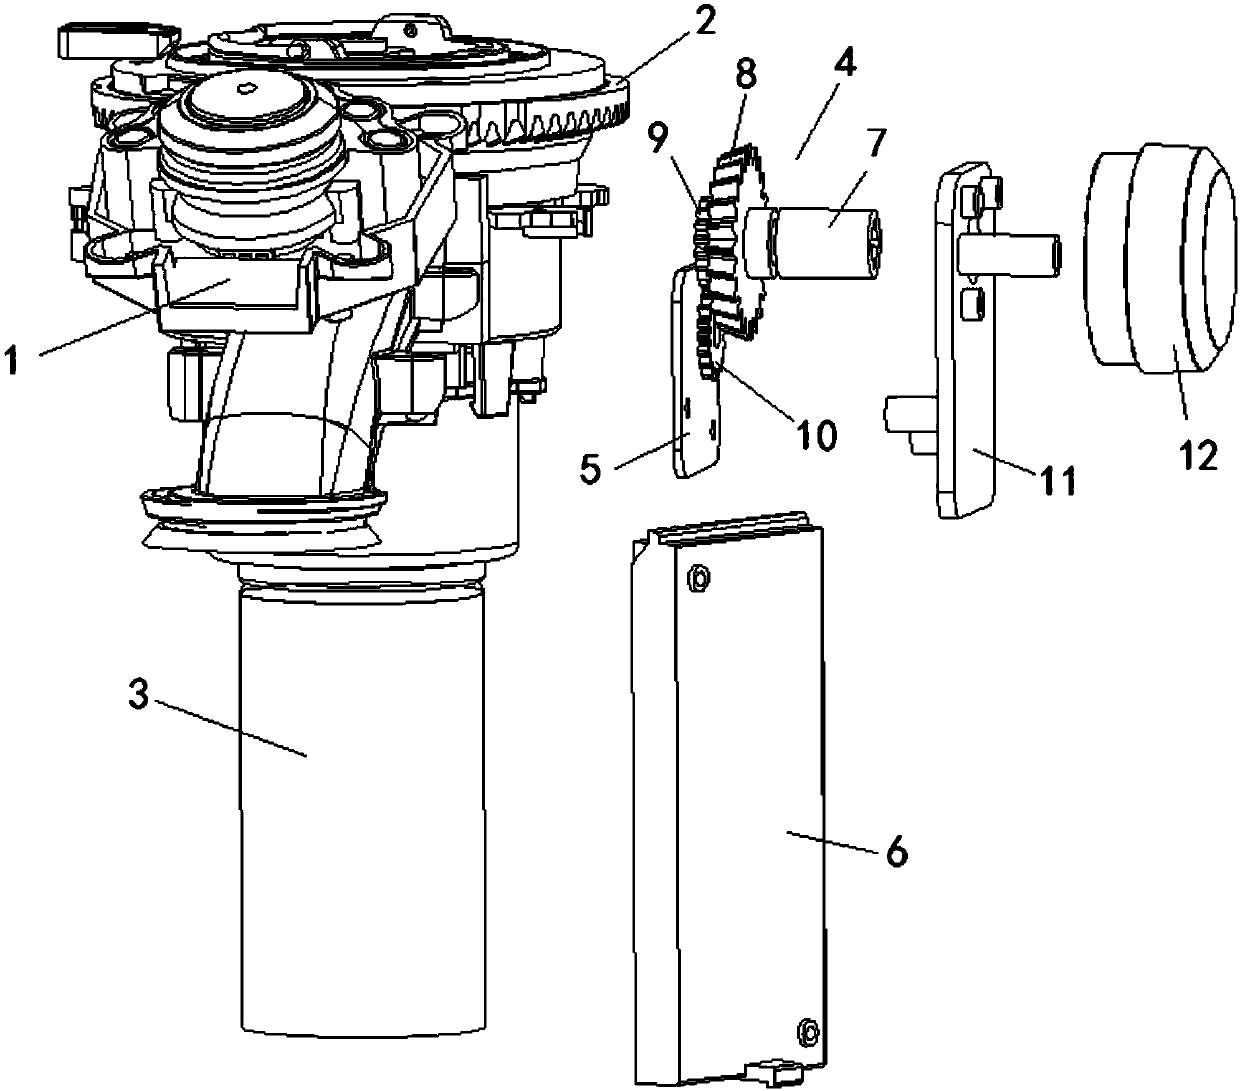 Rotational speed regulating system of bean grinding device